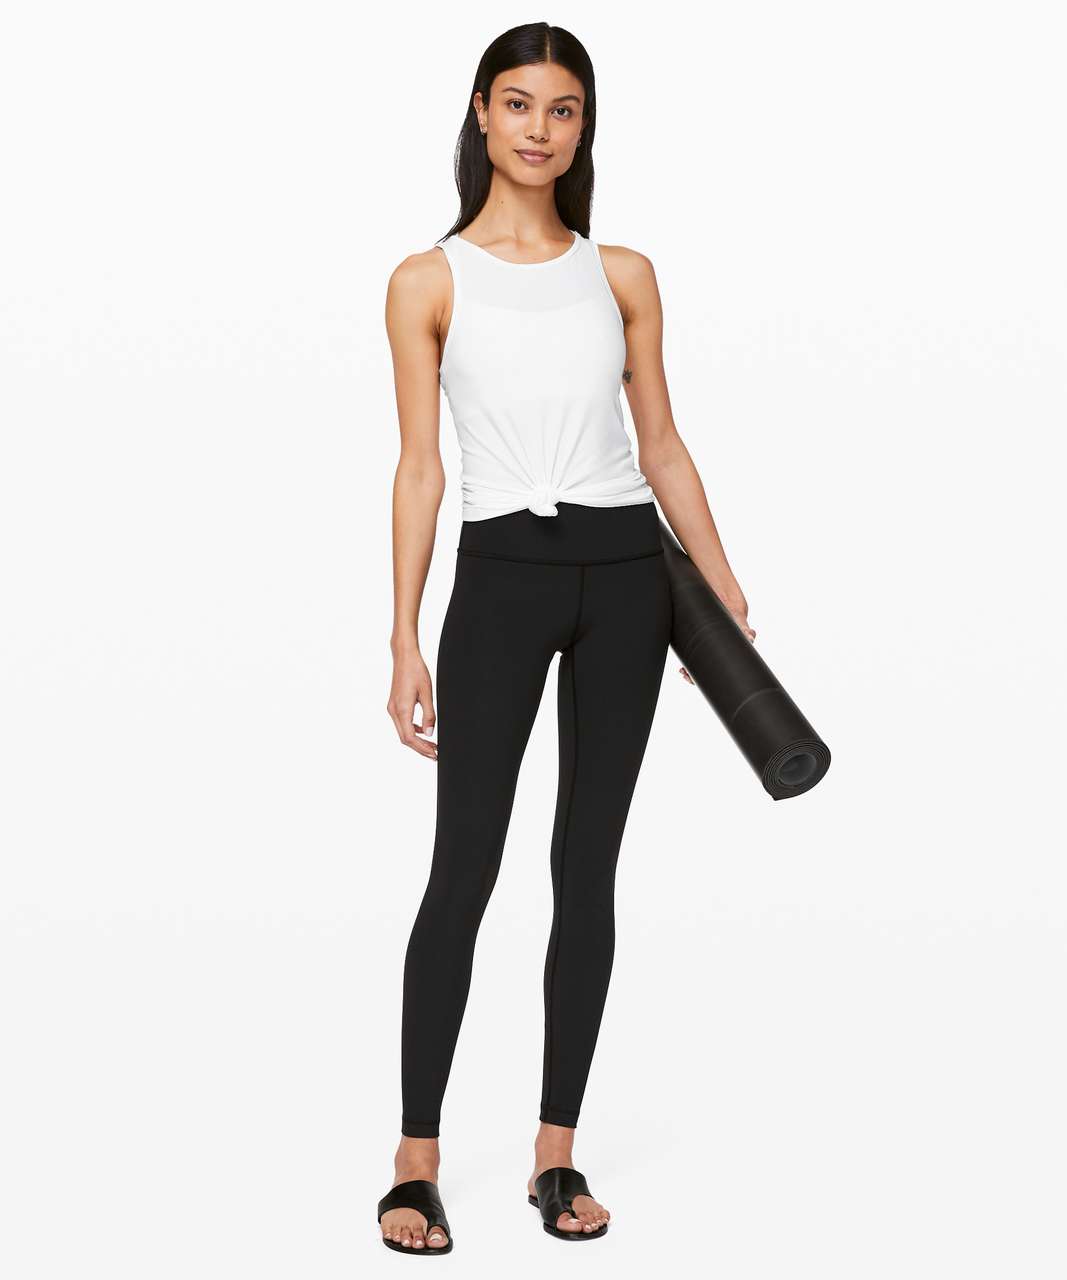 Lululemon Wunder Under High-Rise Tight 28" *Full-On Luxtreme - Black (First Release)